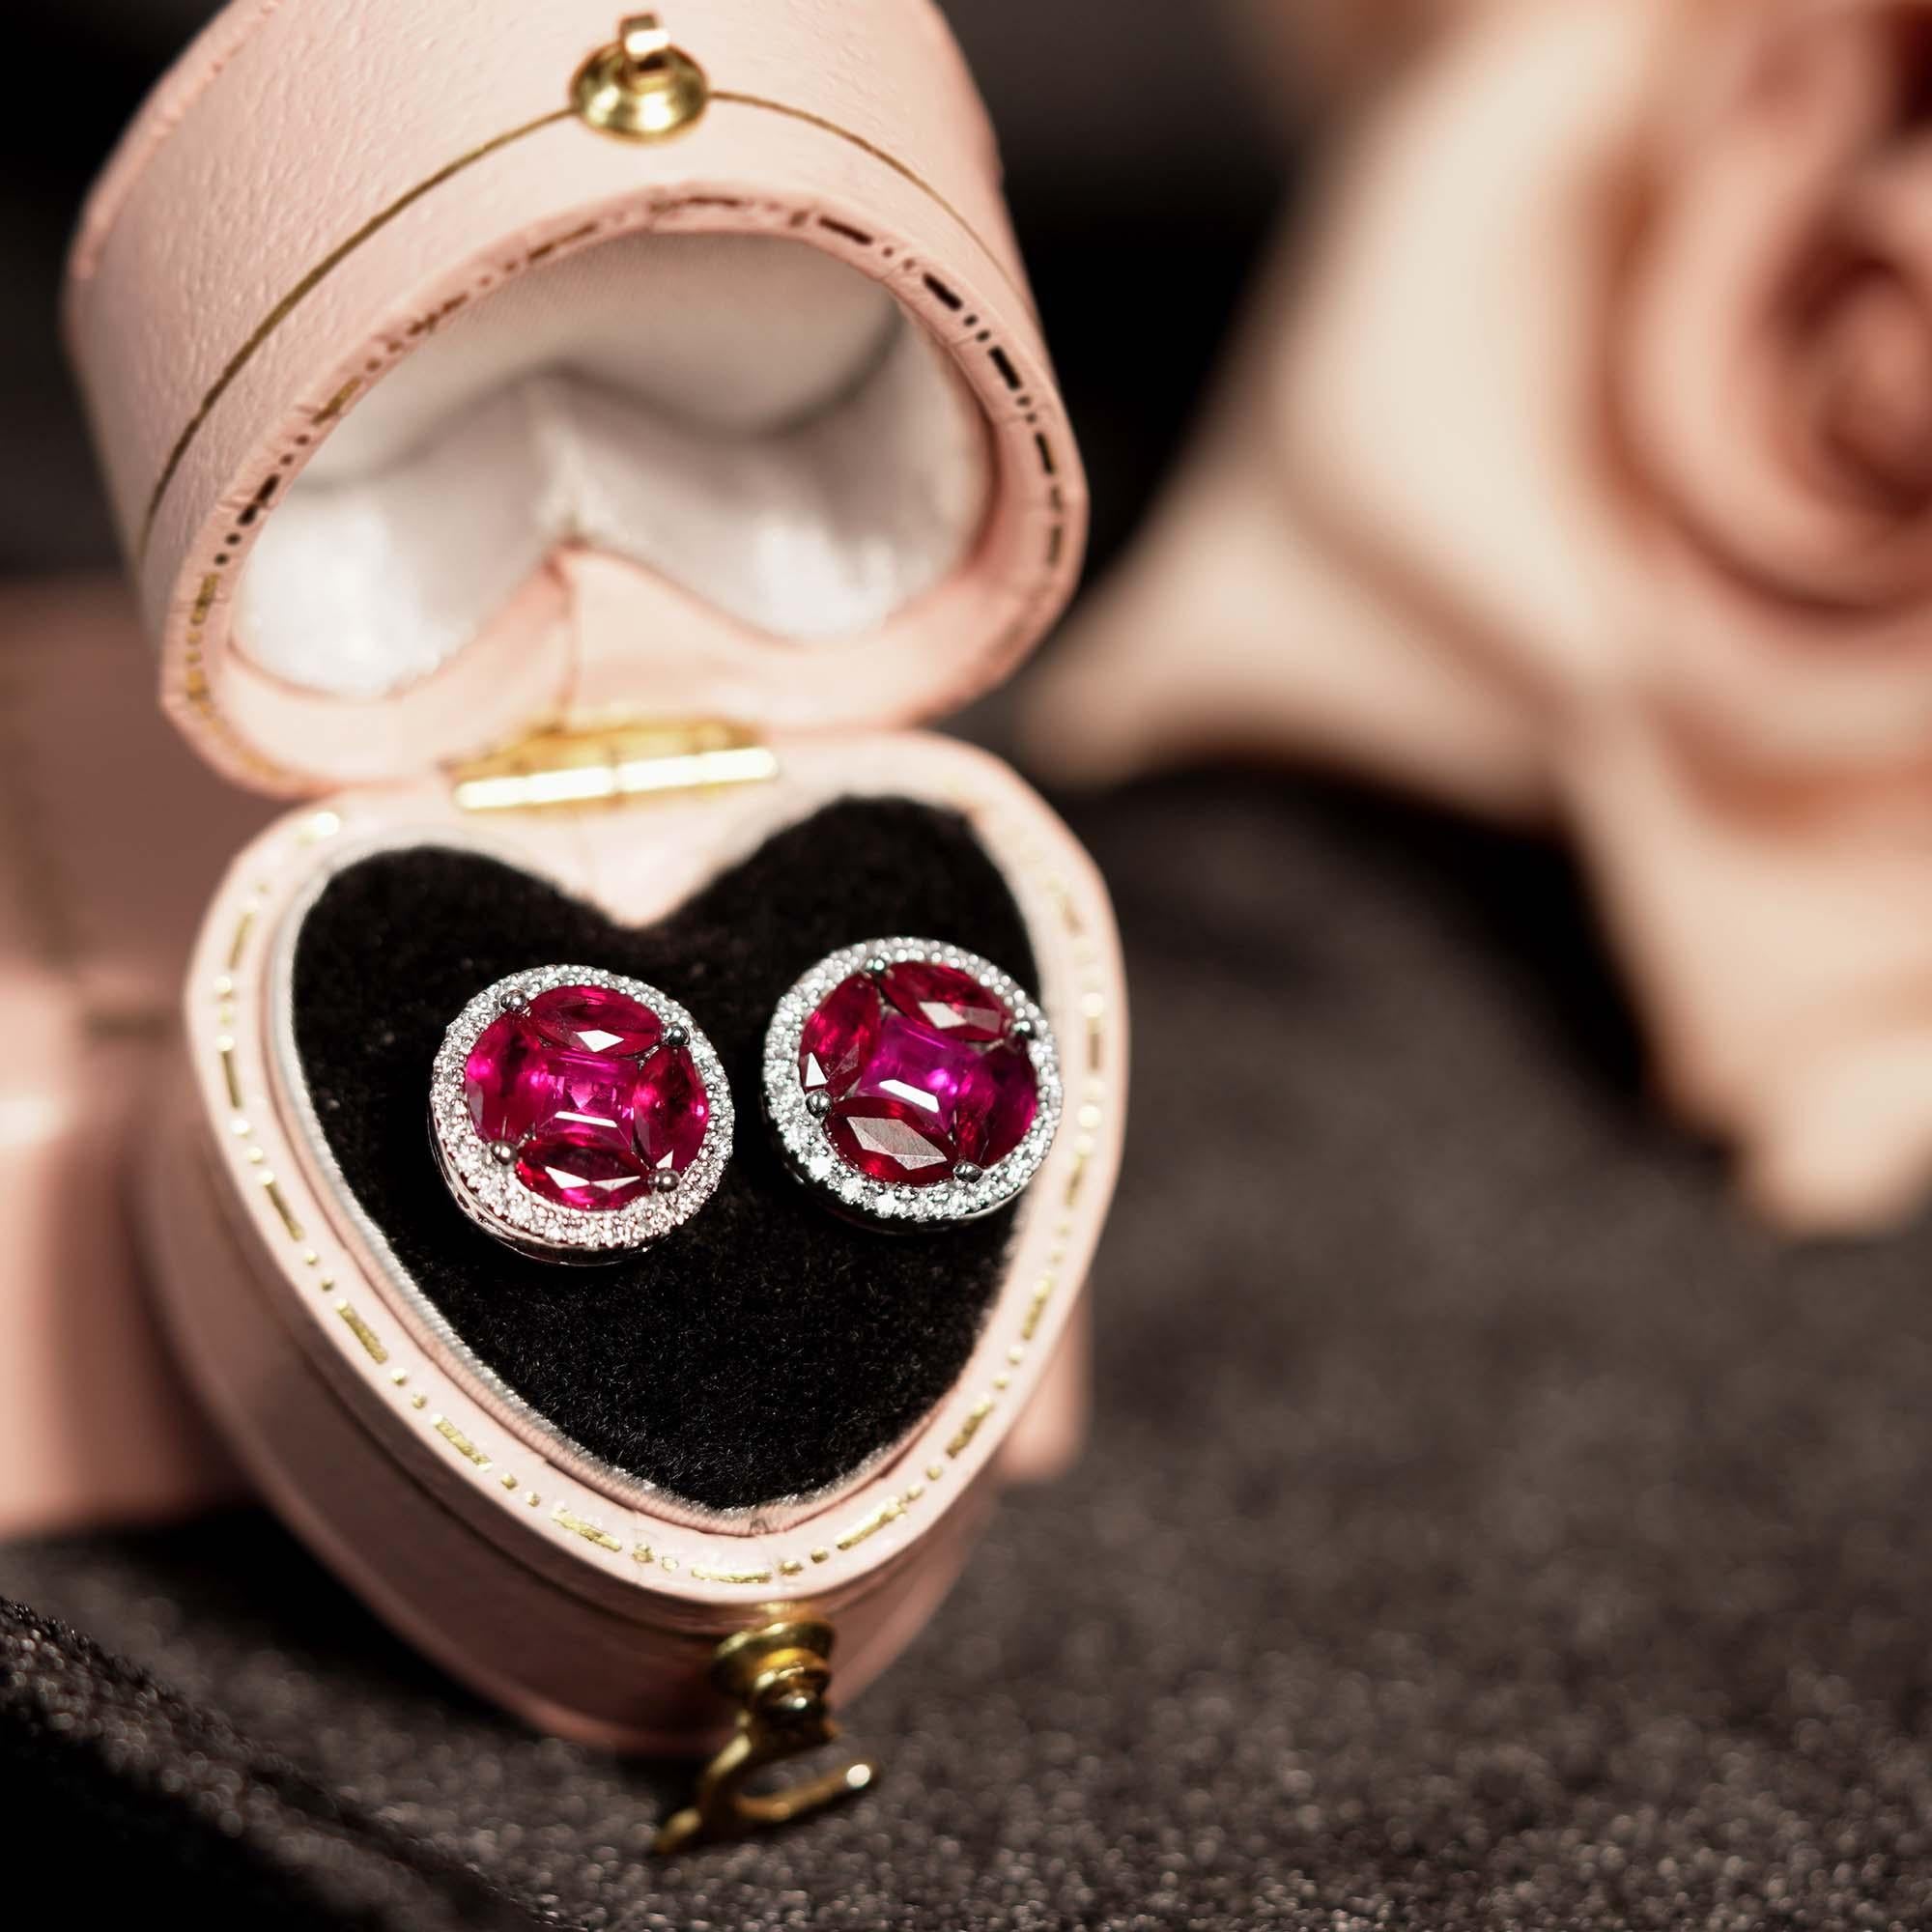 These eye-catching 18k contemporary stud earrings features an impressive white gold setting, centering multi-shaped rubies formed one 8 mm. size look-alike circle, accented by 0.21 carat of round brilliant cut white diamonds. The round shape halo